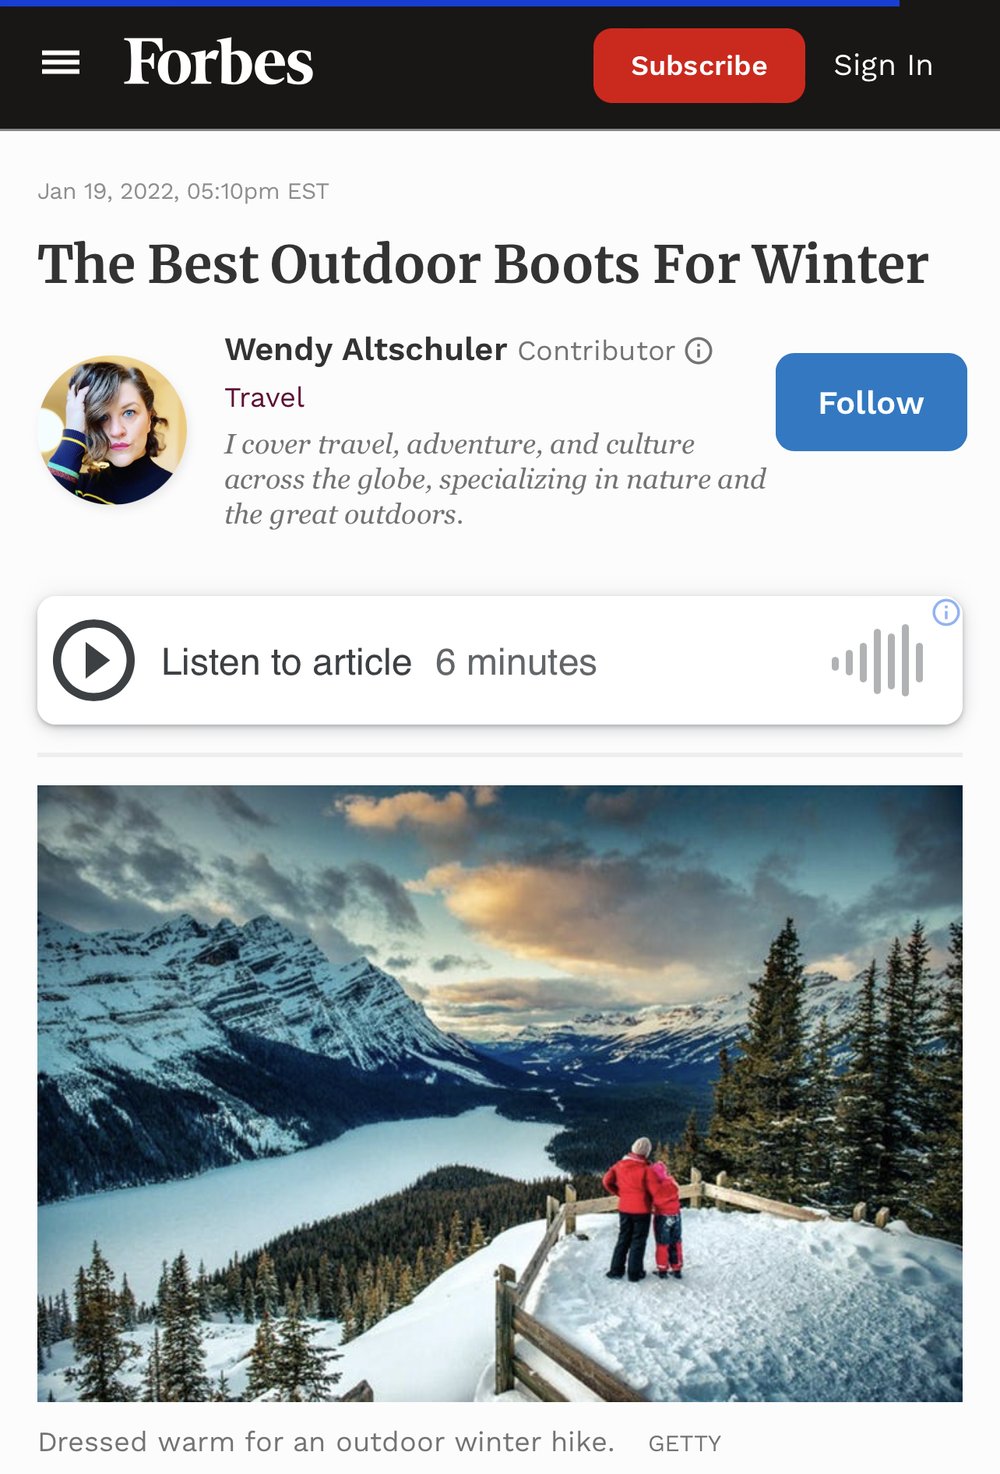 The Best Outdoor Boots For Winter